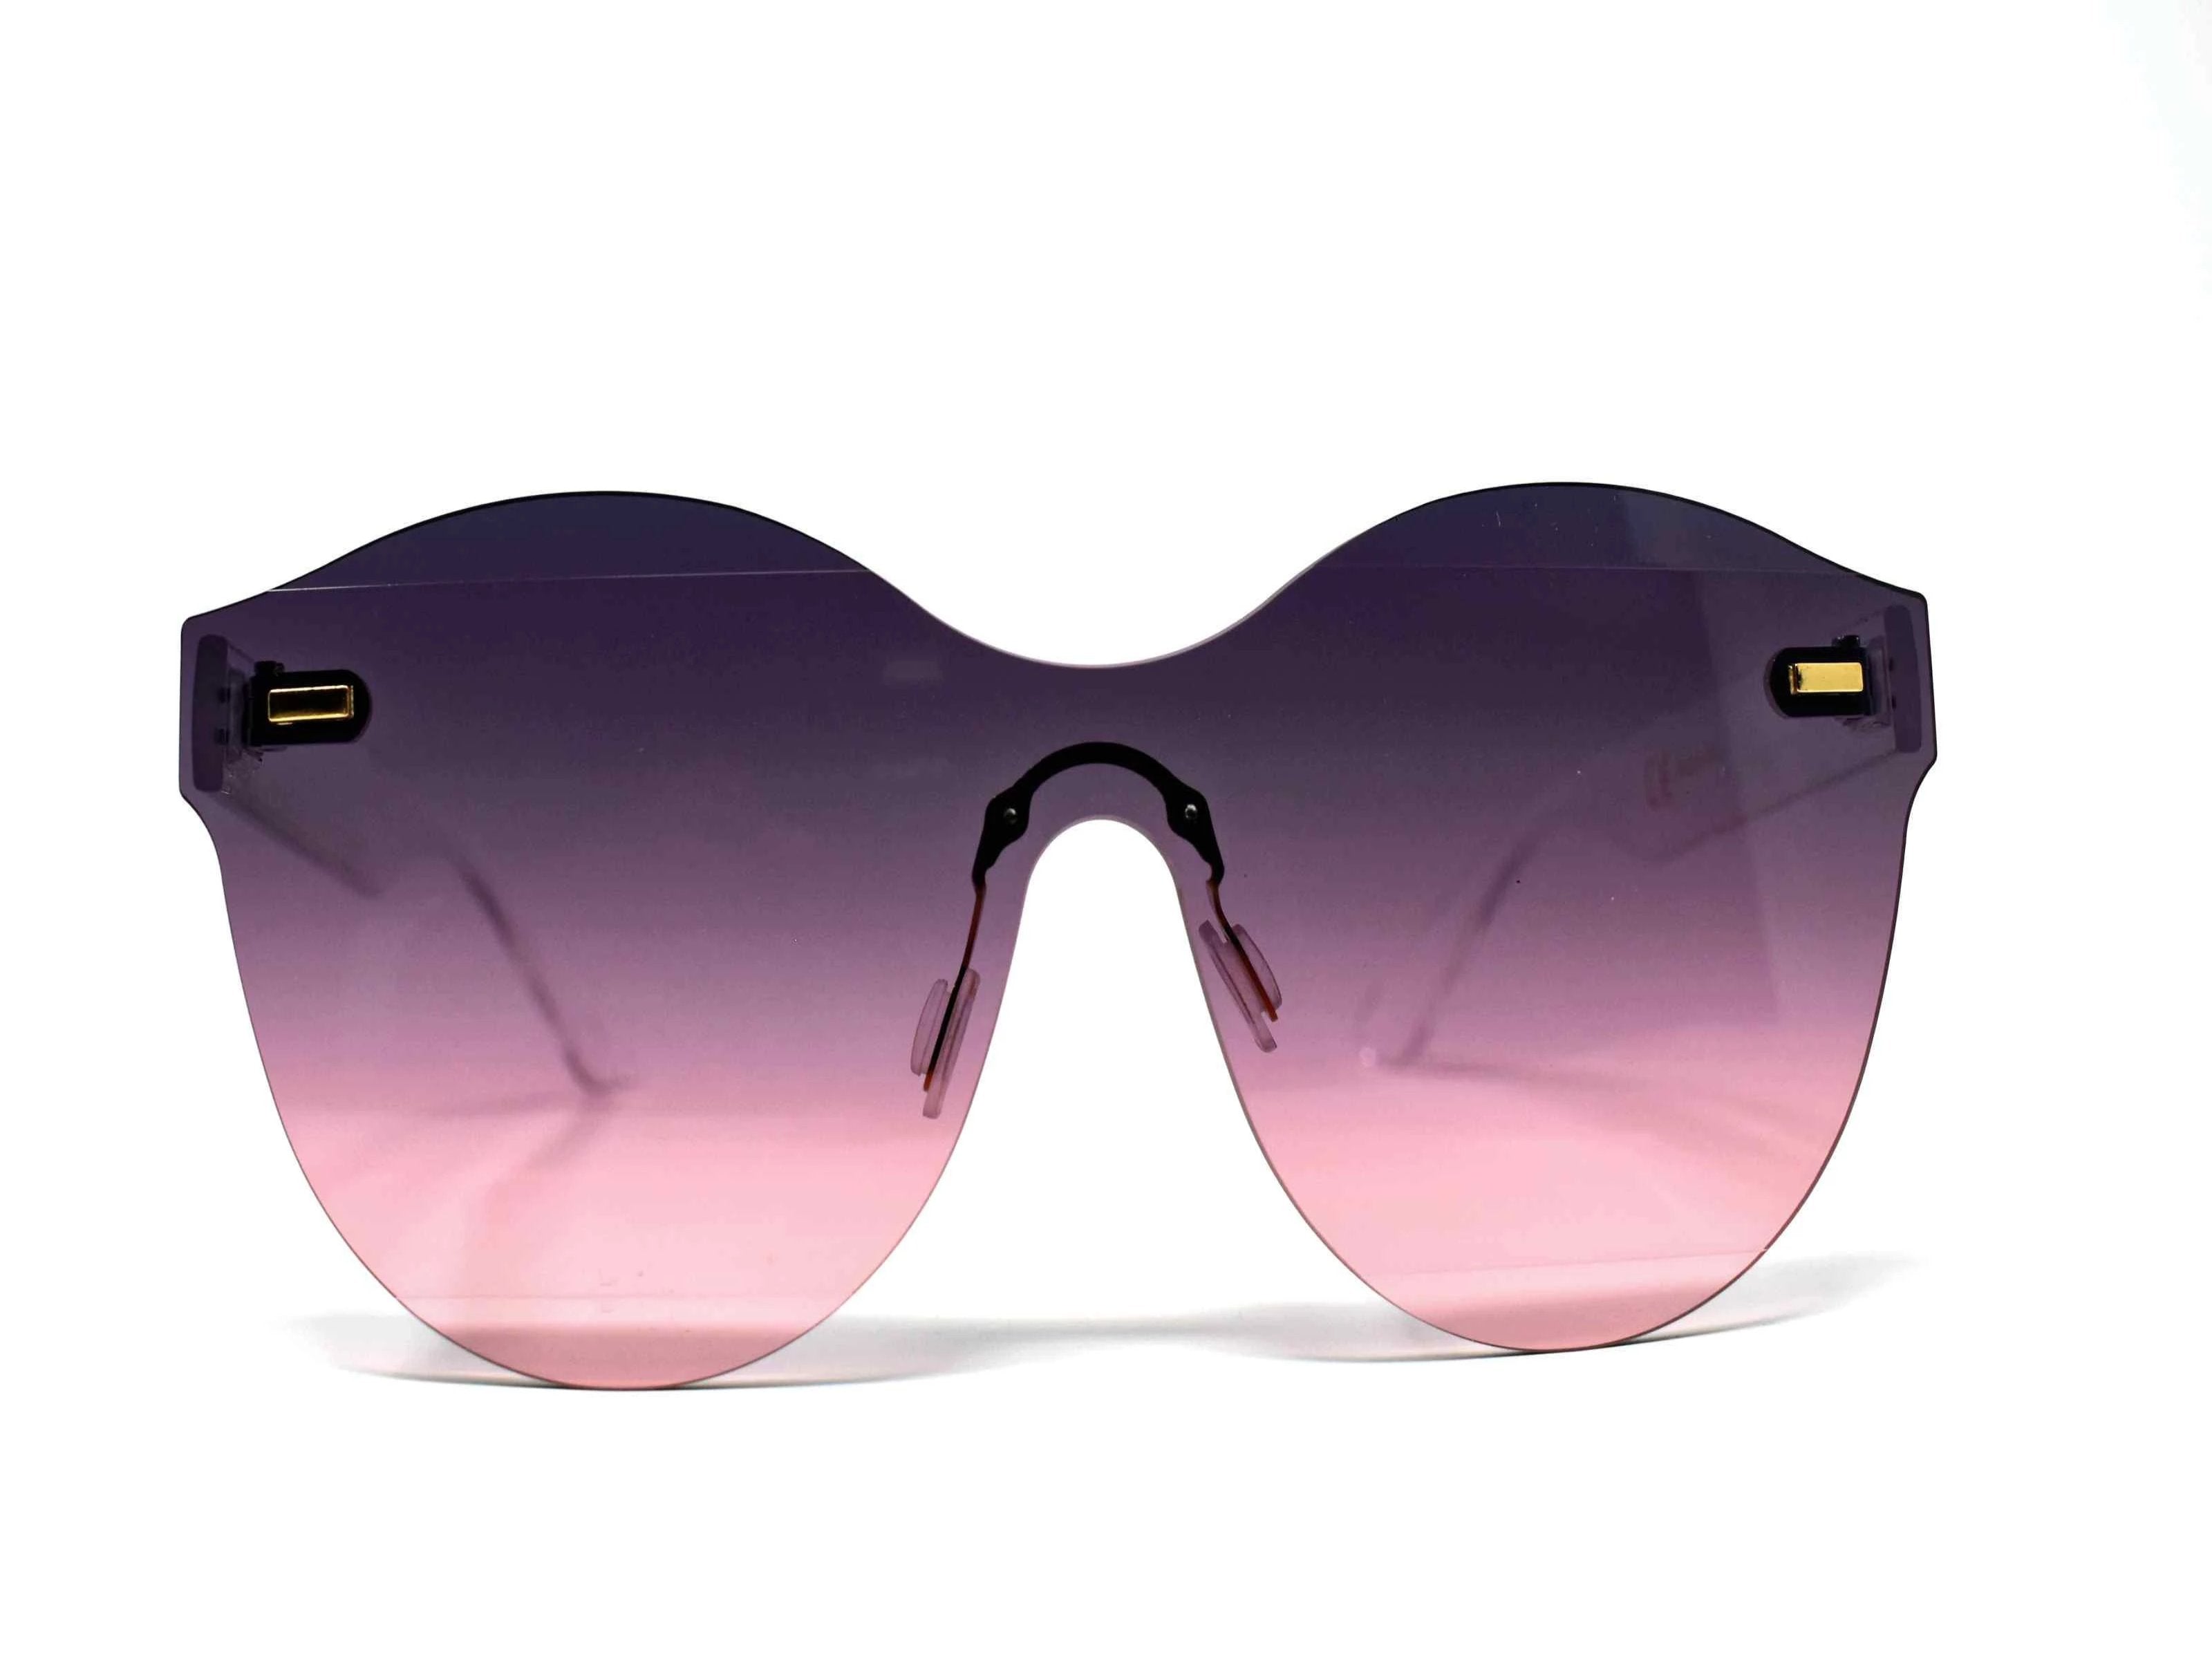 Its just a good vibe in these sage no rim sunglass frames with a plum to pink ombre lens.